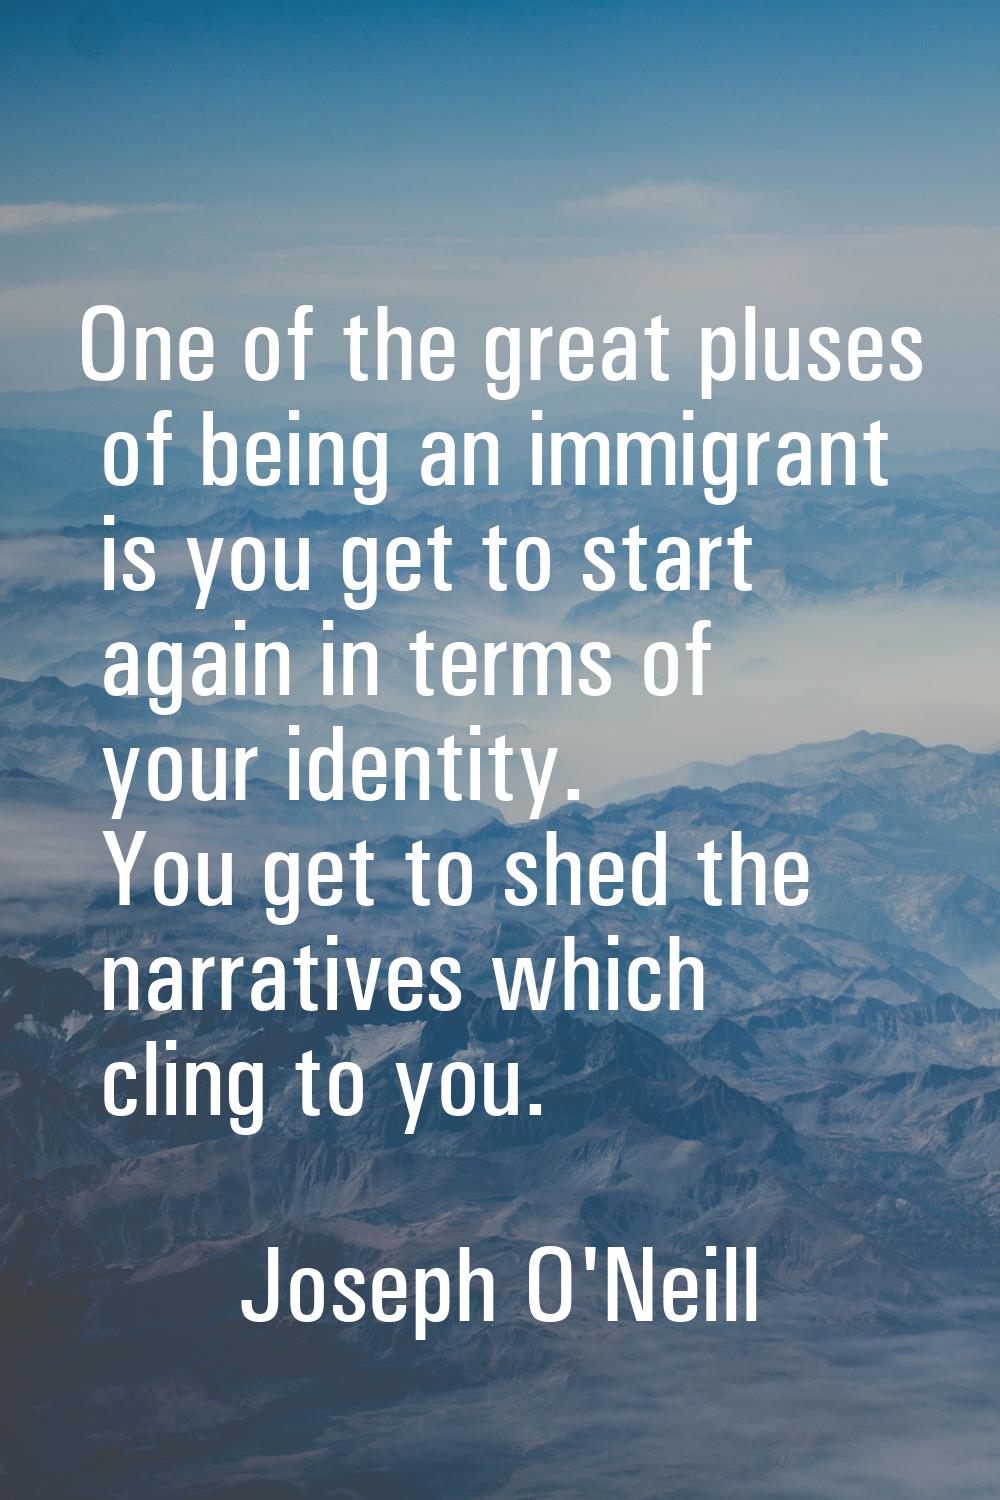 One of the great pluses of being an immigrant is you get to start again in terms of your identity. 